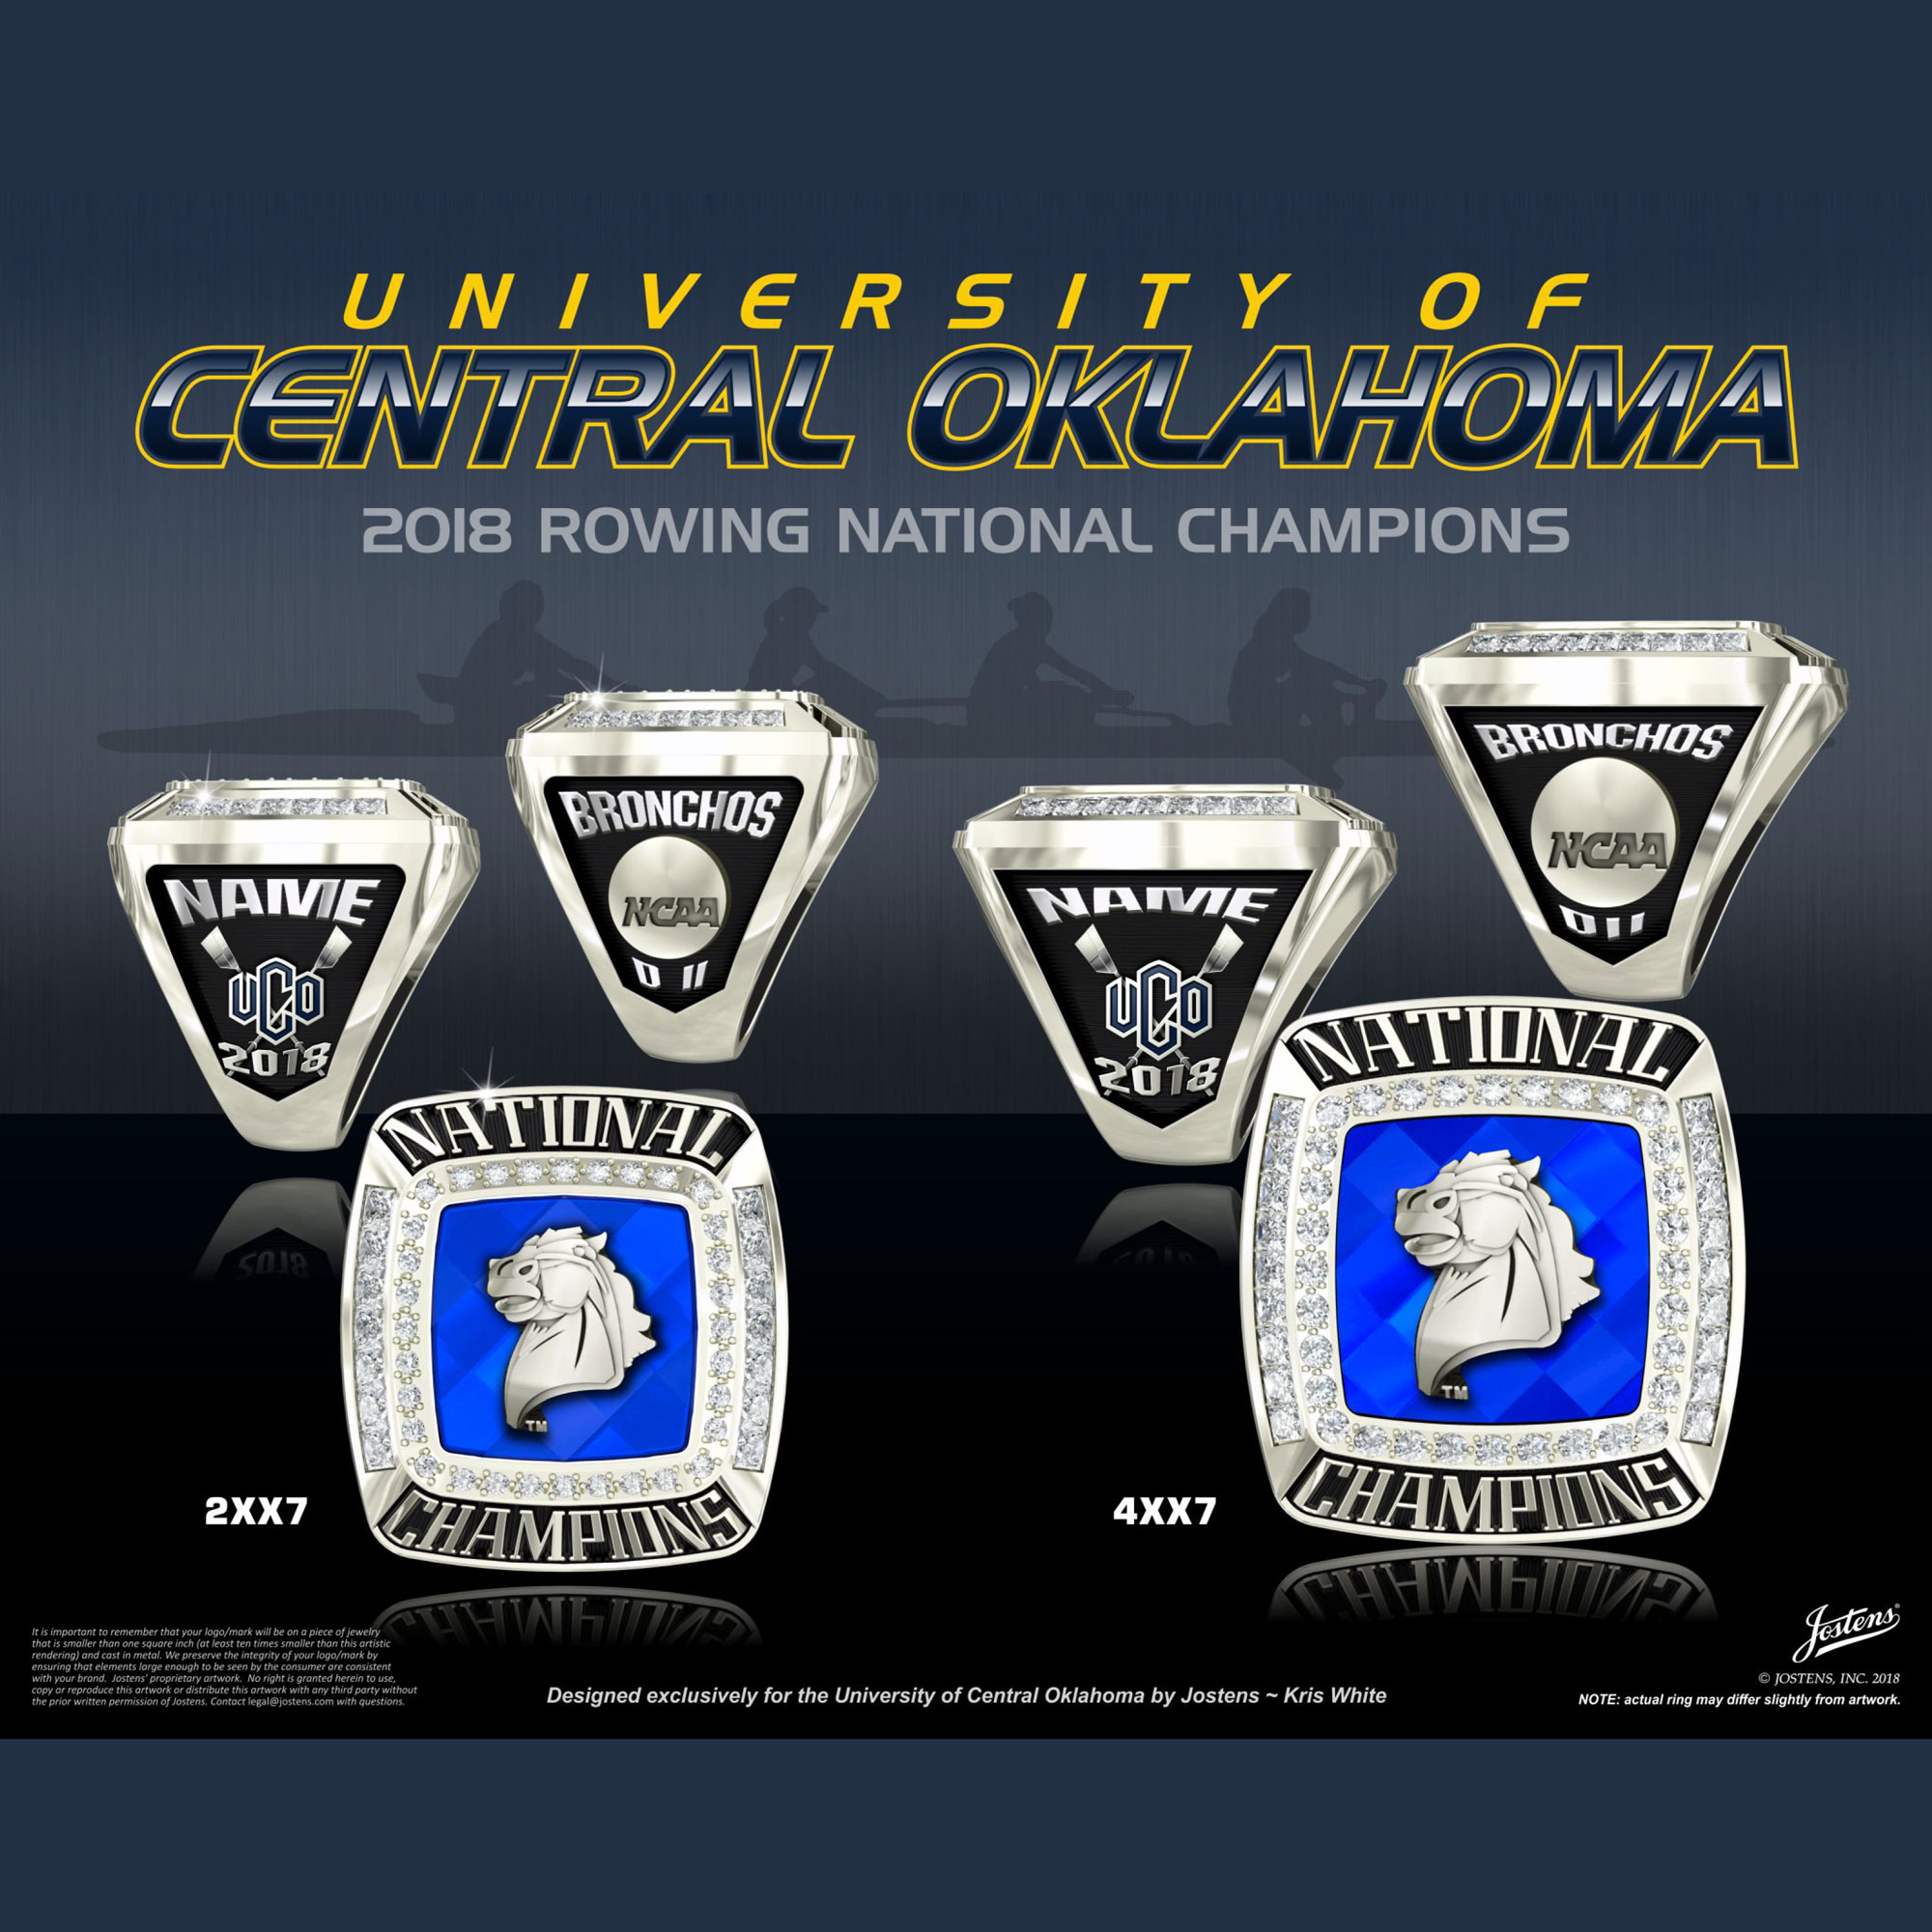 University of Central Oklahoma Men's Rowing 2018 National Championship Ring